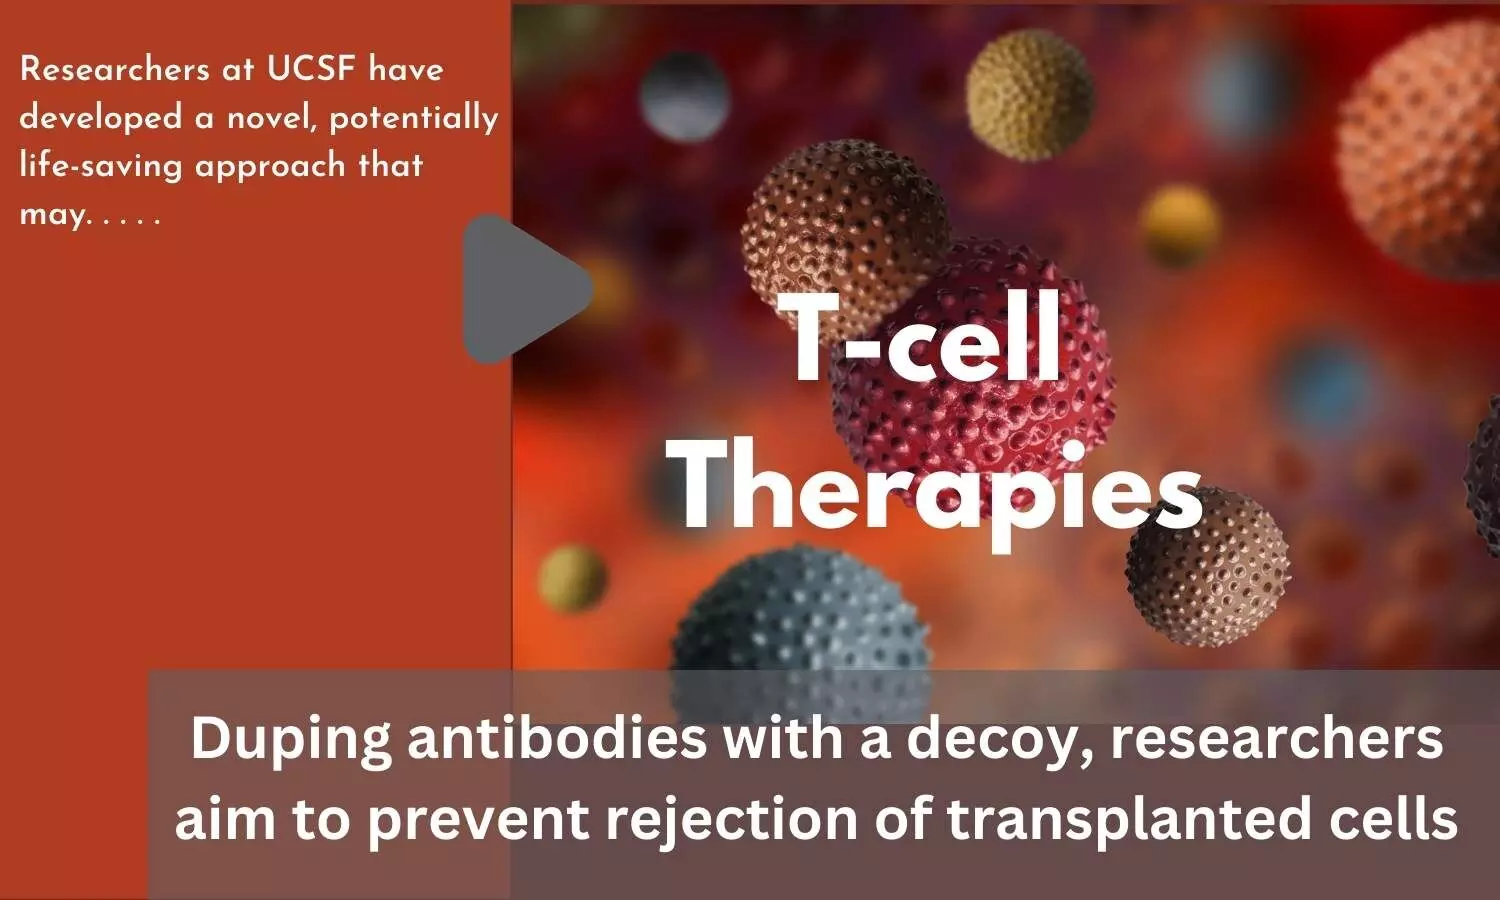 Duping antibodies with a decoy, researchers aim to prevent rejection of transplanted cells